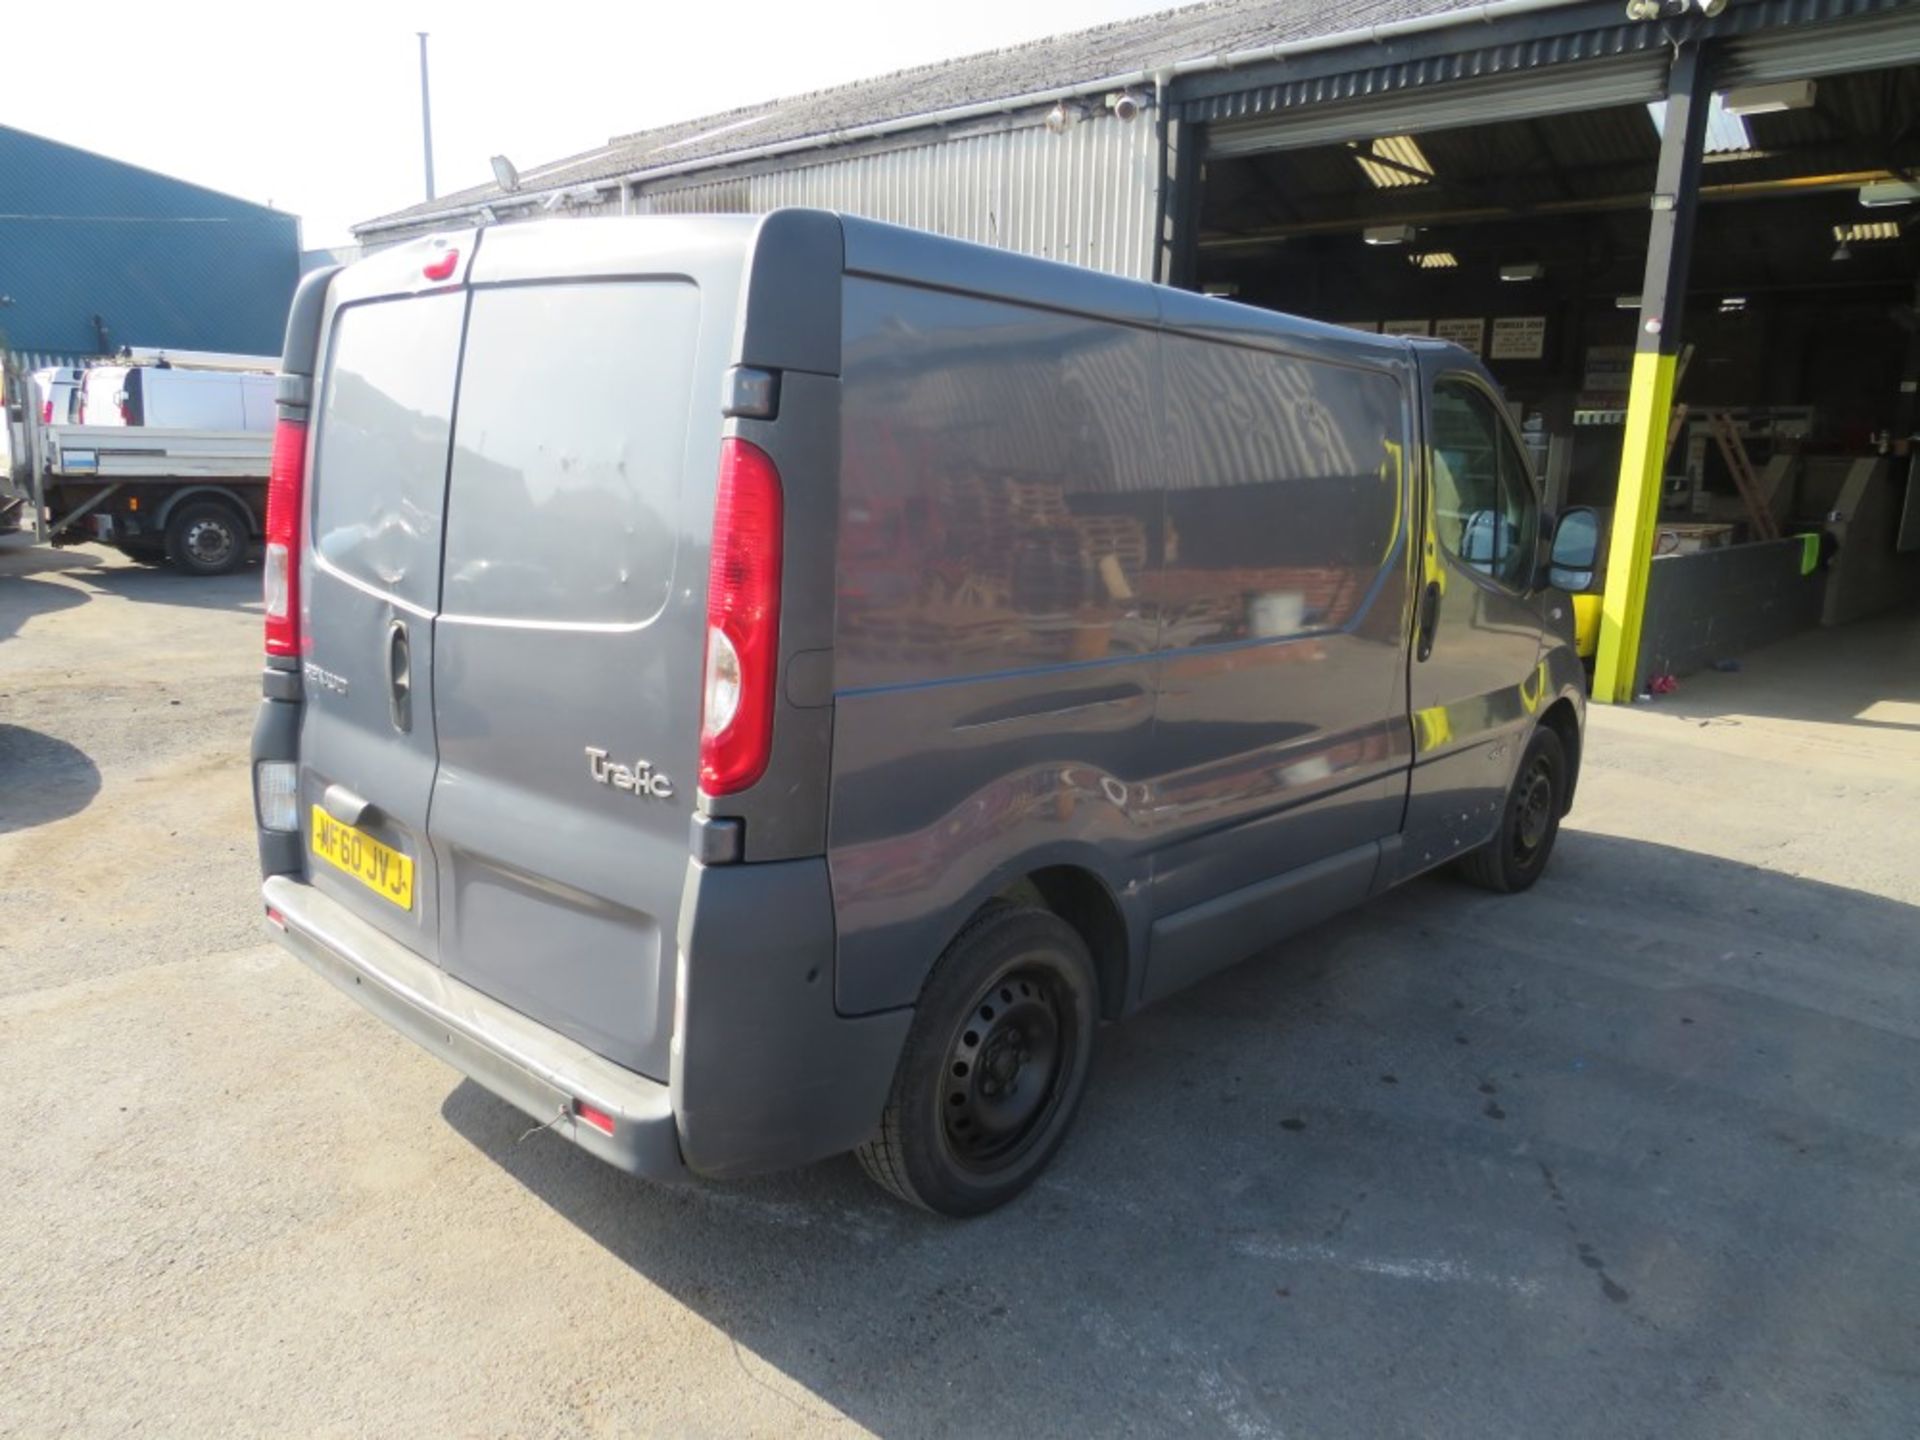 60 reg RENAULT TRAFIC SL27 DCI 115, 1ST REG 09/10, 180327M NOT WARRANTED, V5 HERE, 1 OWNER FROM - Image 4 of 7